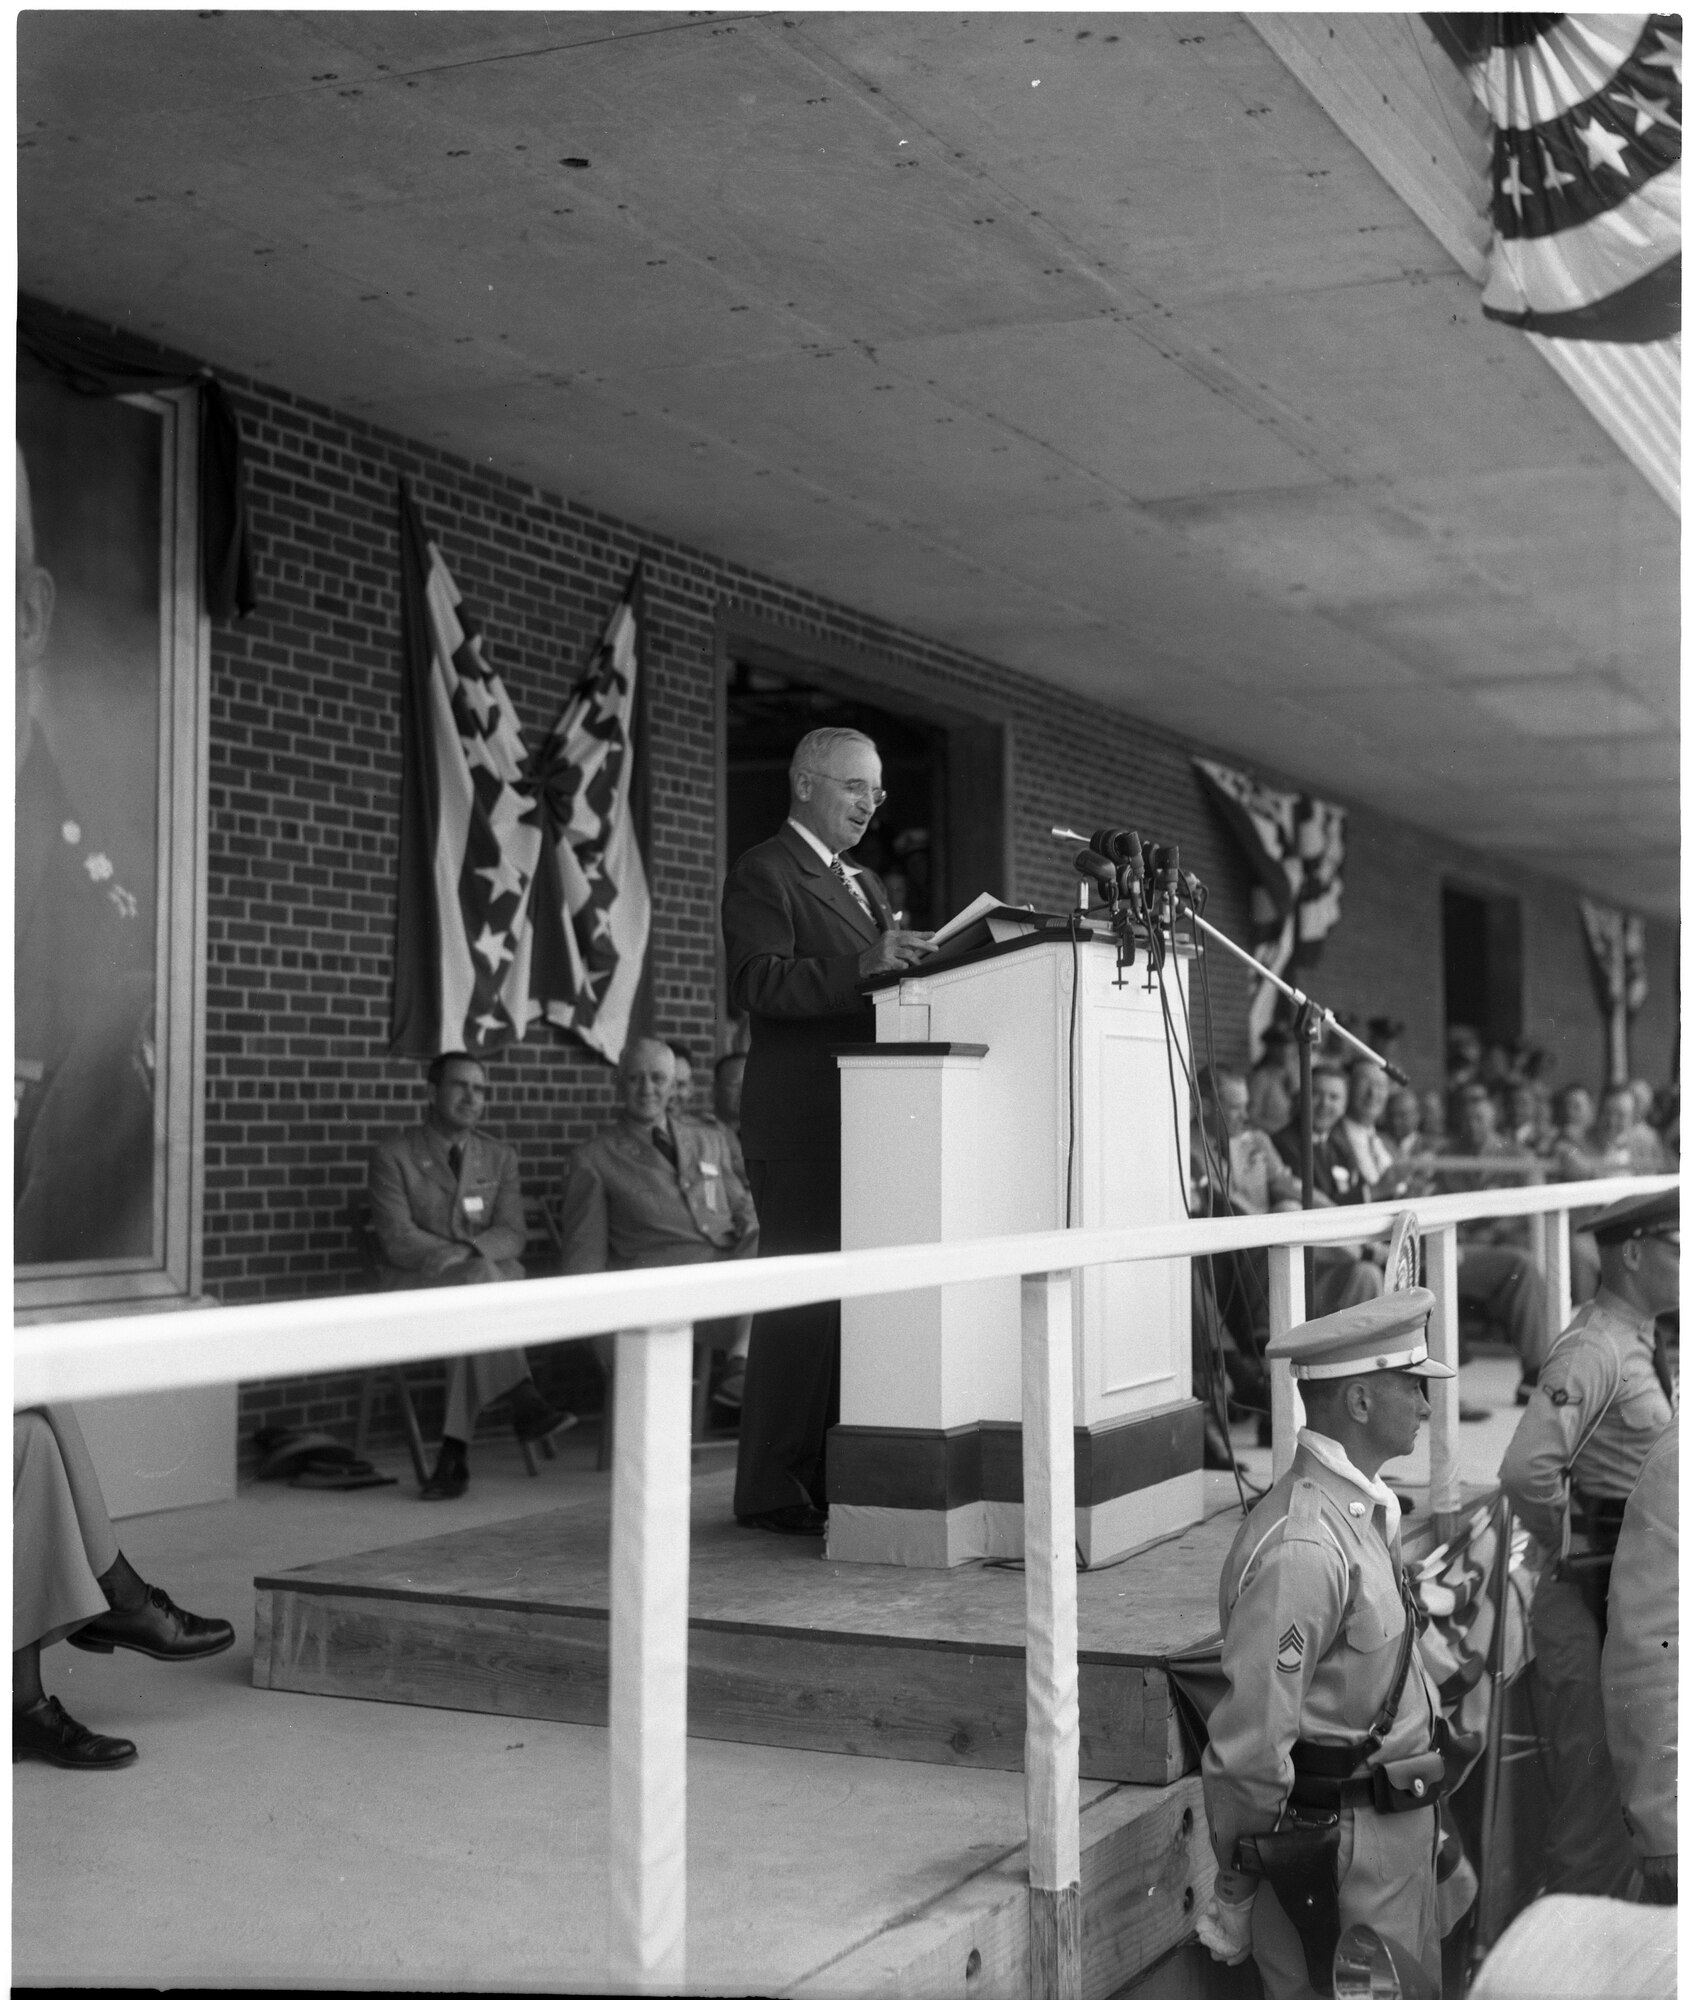 President Harry Truman delivers the dedication speech at the Arnold Engineering Development Complex in 1951. The President dedicated the new Air Engineering Development Center as the then Arnold Engineering Development center in memory of General of the Air Force Henry “Hap” Arnold. Arnold had pushed for the establishment of the test complex so that America would never lag behind in aerospace testing again. President Truman said in his address that “here men would explore flight beyond the speed of sound.” Mrs. Arnold, her sons, then Air Force Chief of Staff Gen. Hoyt S. Vandenberg and thousands of guests braved the unseasonable heat and dust to attend the ceremony. (AEDC file photo)